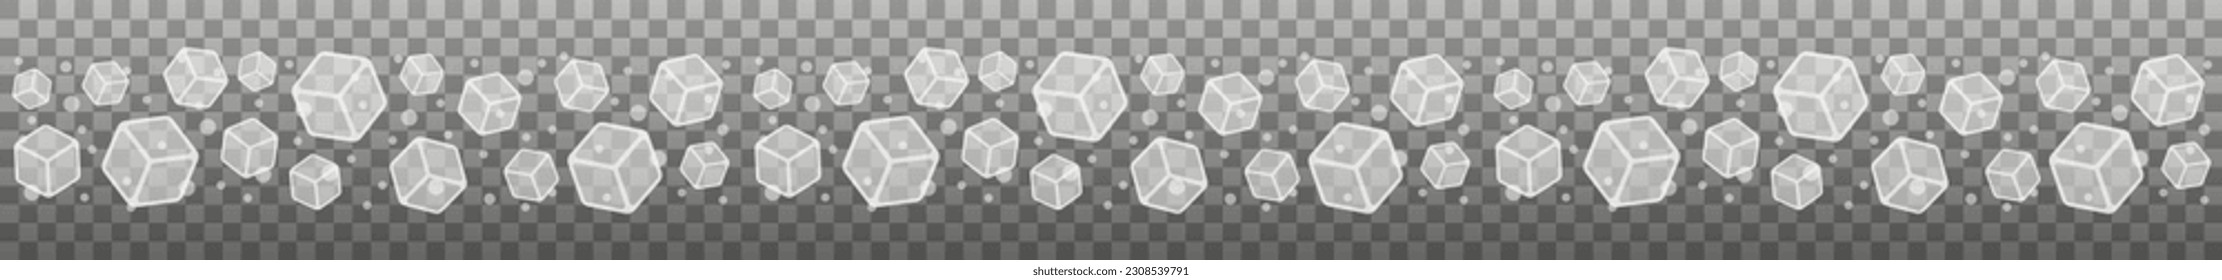 Border garland with 3d ice cubes and bubbles. Isolated vector illustration.